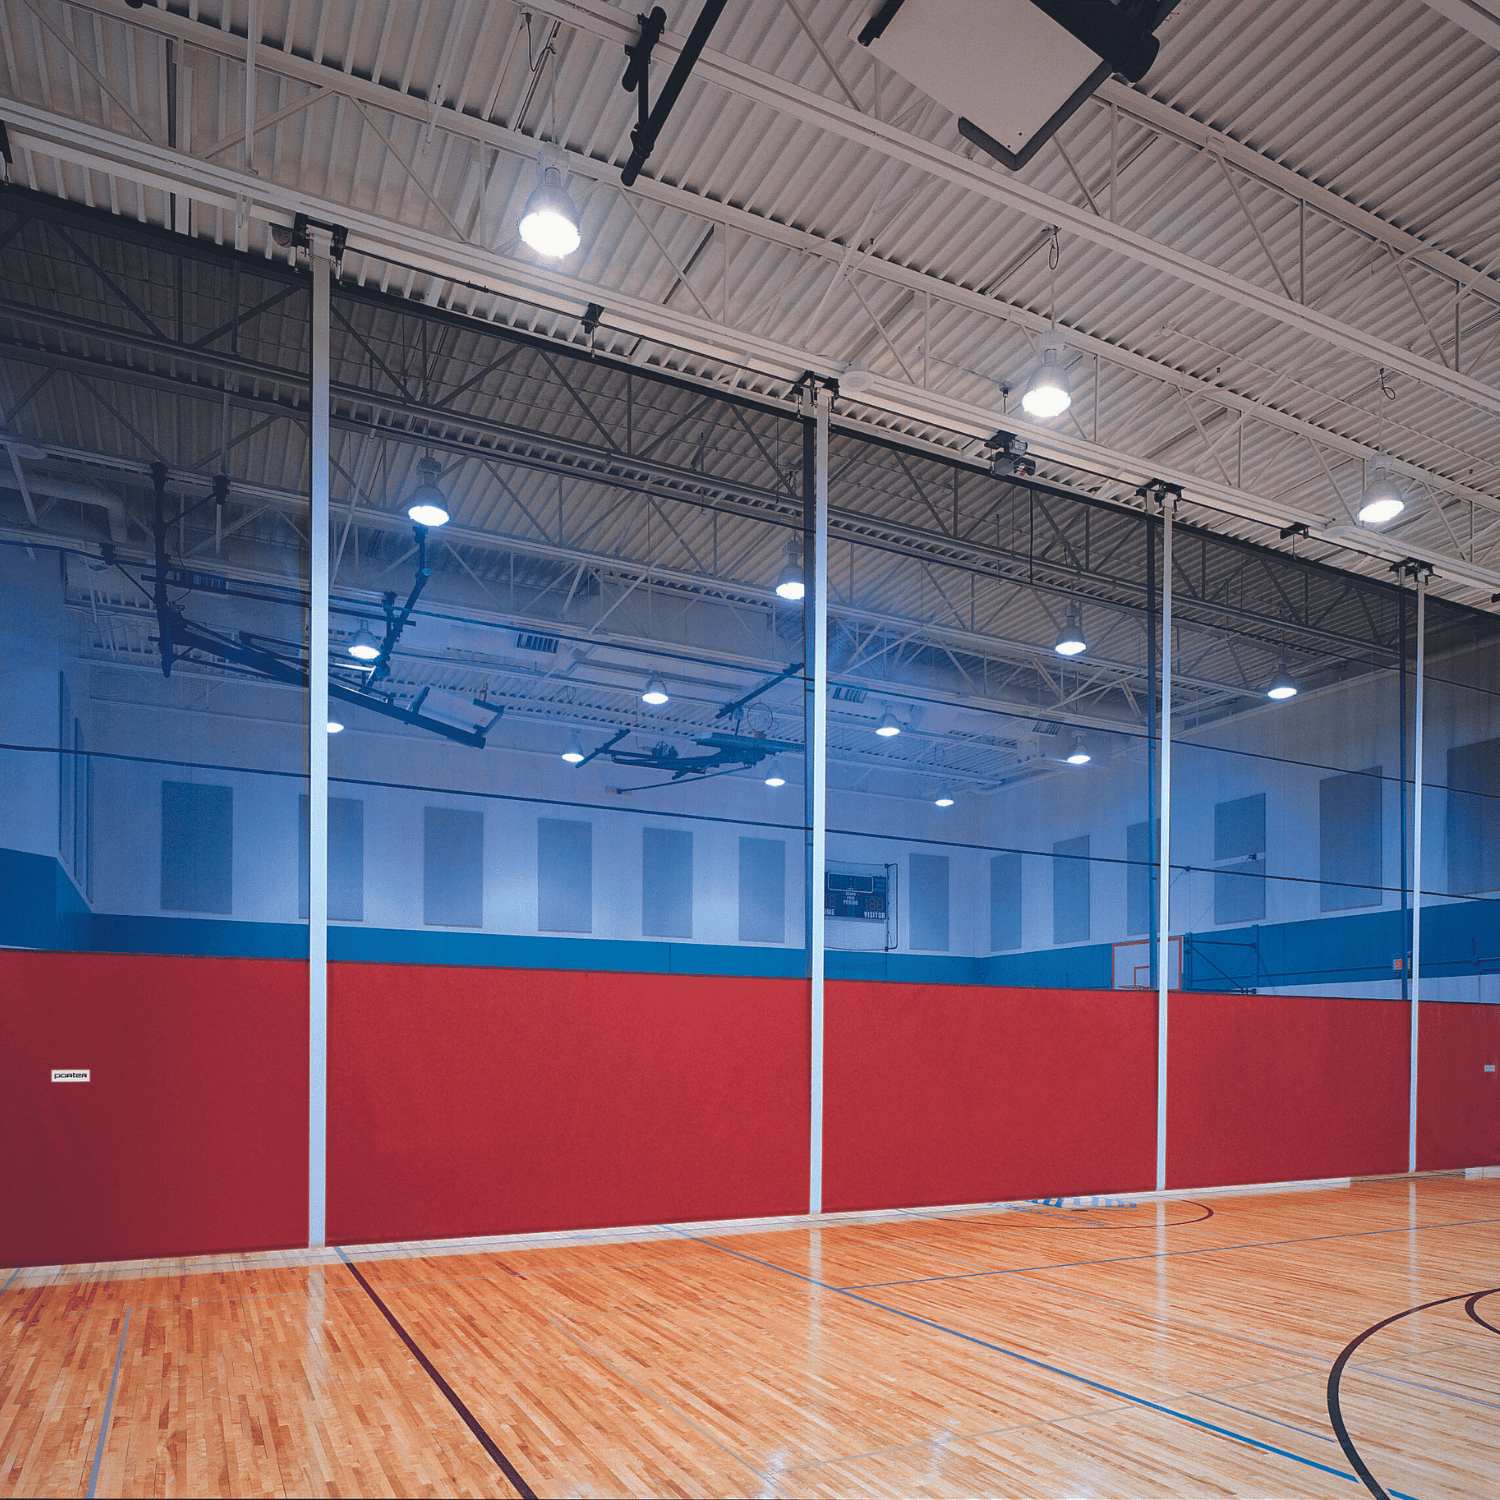 custom gym divider curtain net sporting red and blue colors